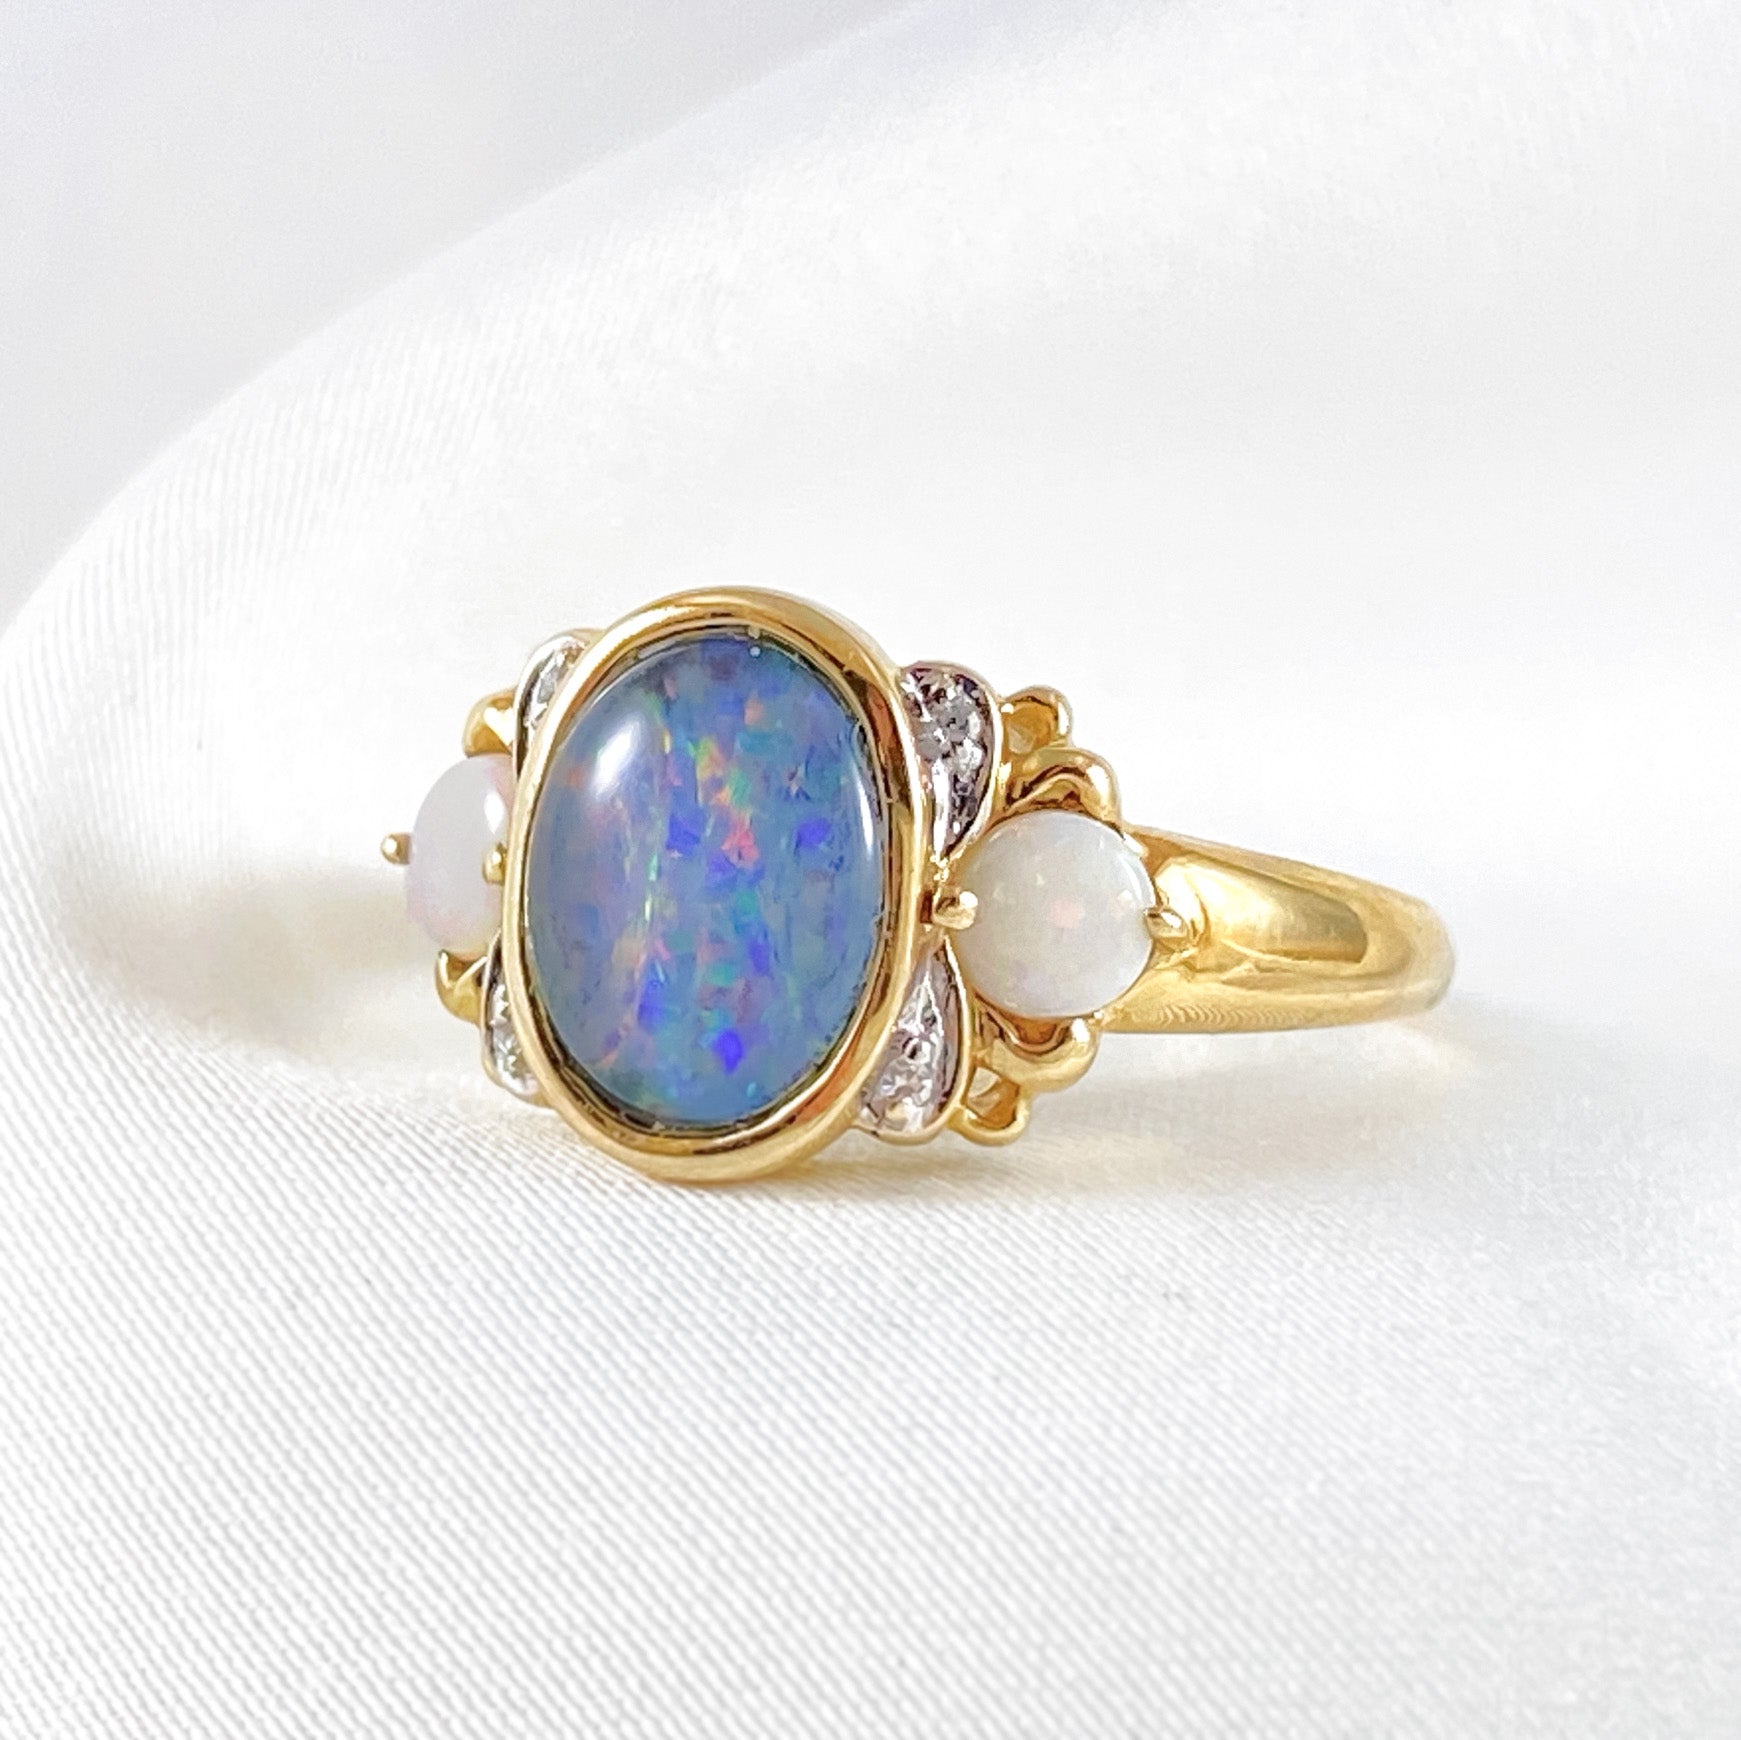 Blue & White Opal Ring with Diamonds